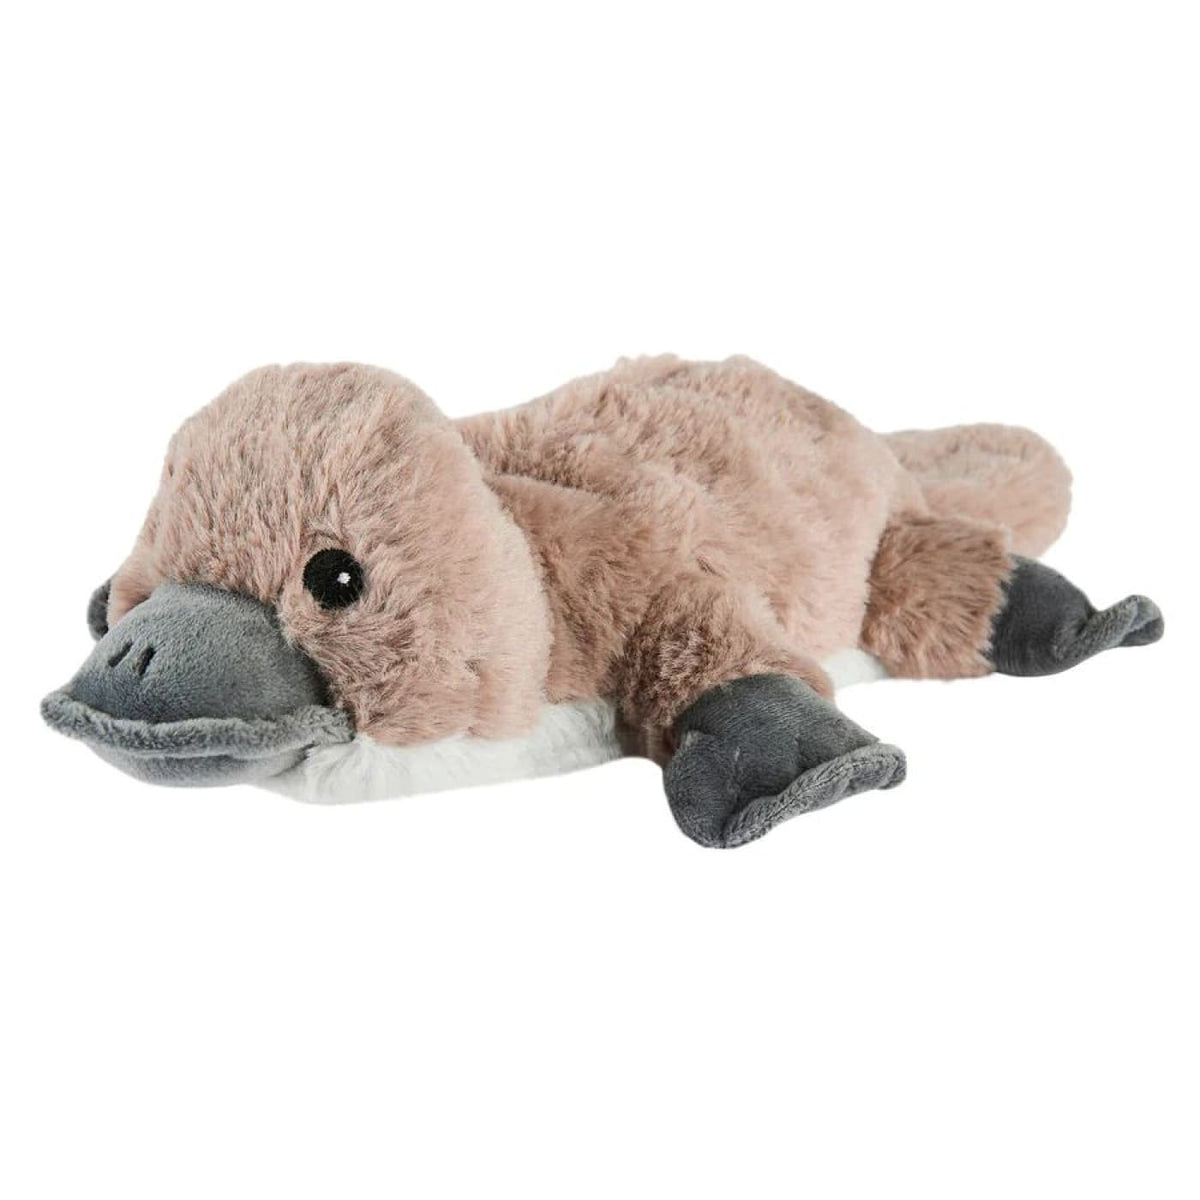 Warmies Heatable Soft Toy Scented with French Lavender - Platypus - Platypus - HEALTH &amp; HOME SAFETY - THERMOMETERS/MEDICINAL